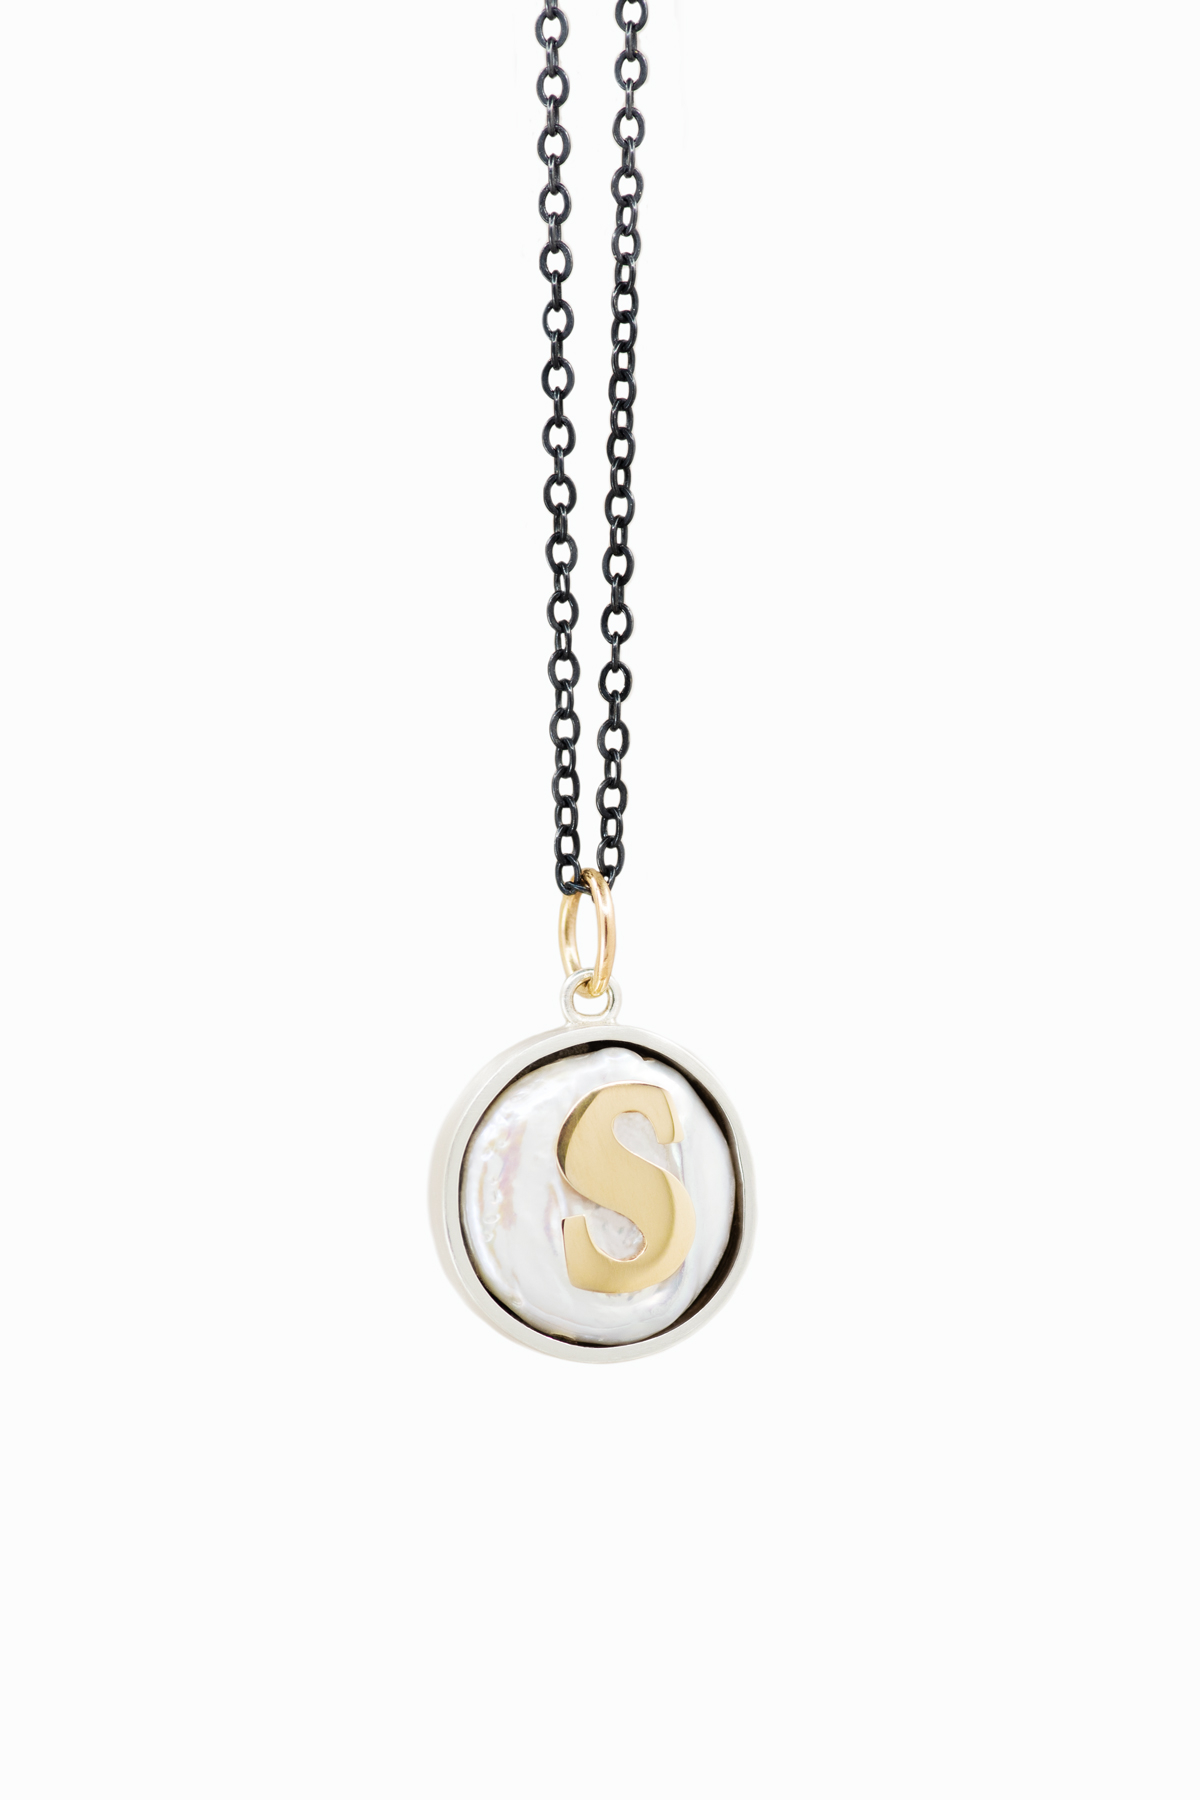 Serif on a pearl necklace